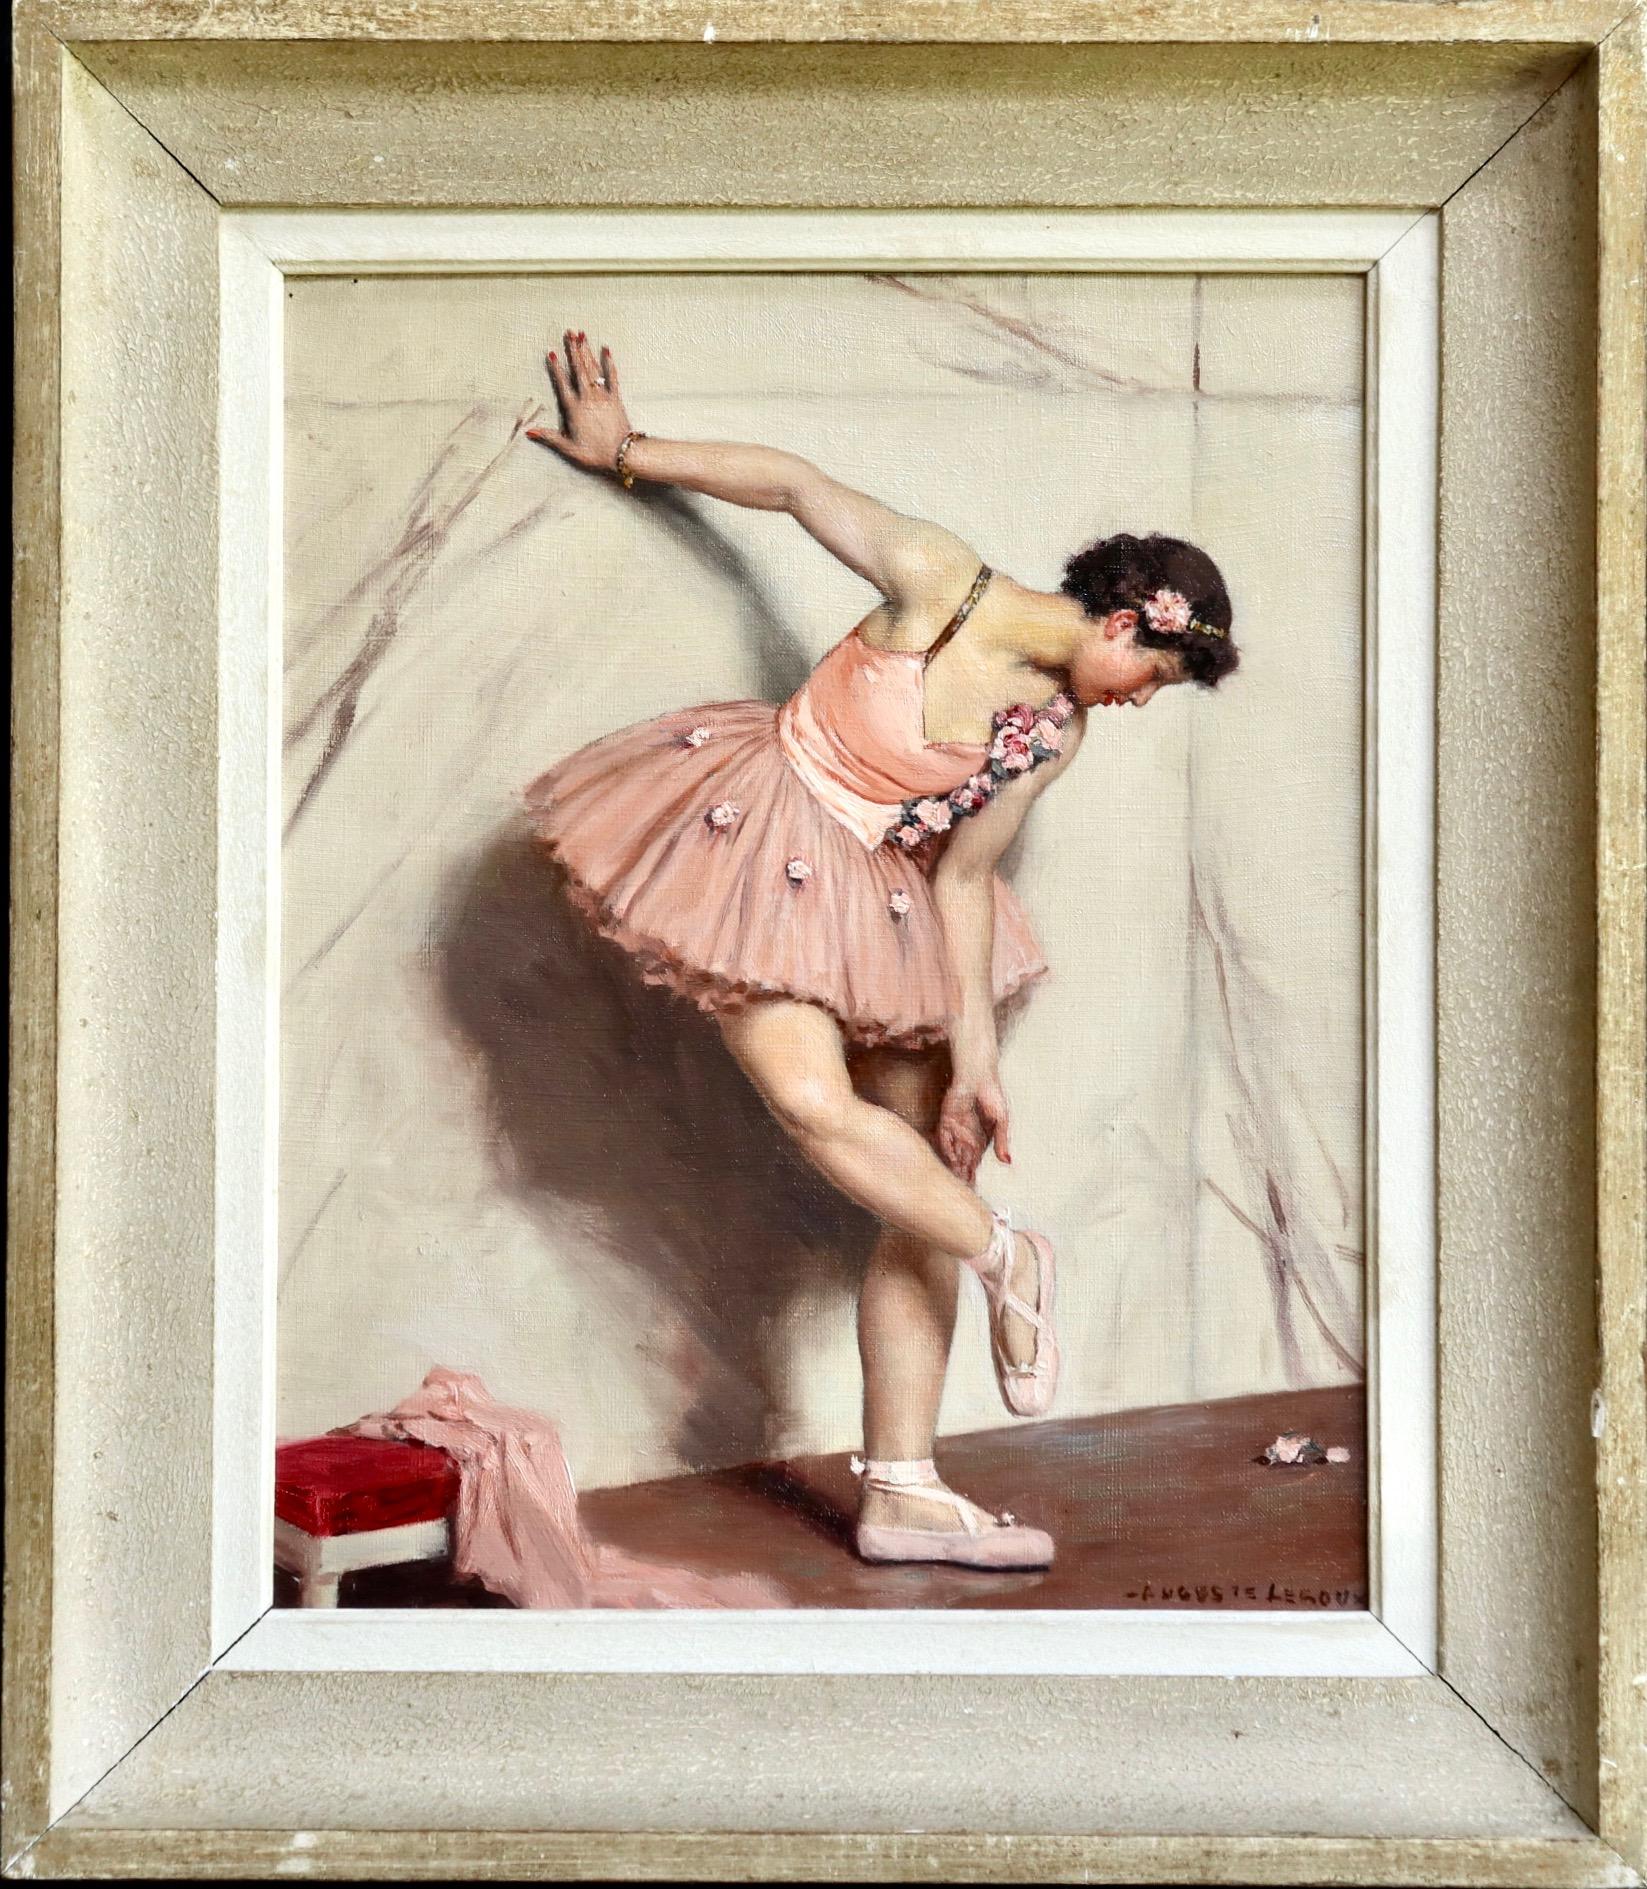 Ballet Dancer -20th Century Oil, Ballerina Figure in Interior, by Auguste Leroux - Post-Impressionist Painting by Jules Marie Auguste Leroux